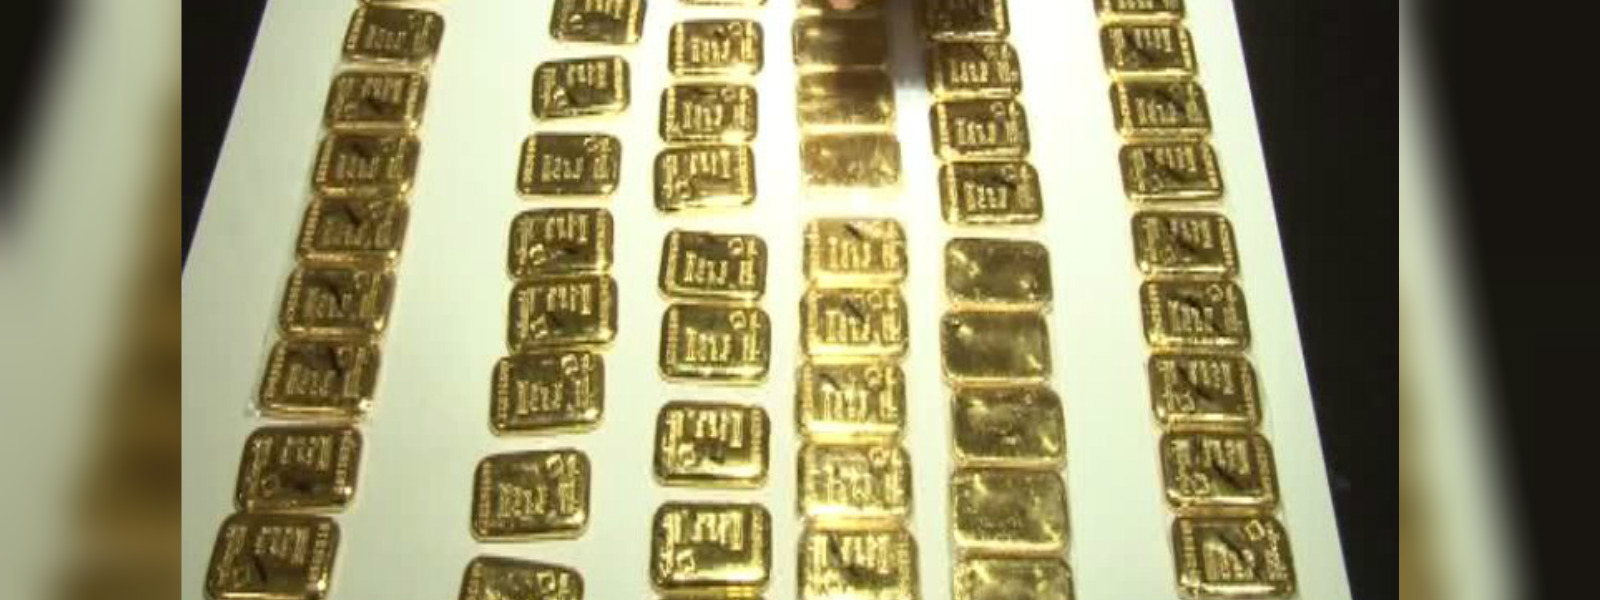 60 gold biscuits taken into custody